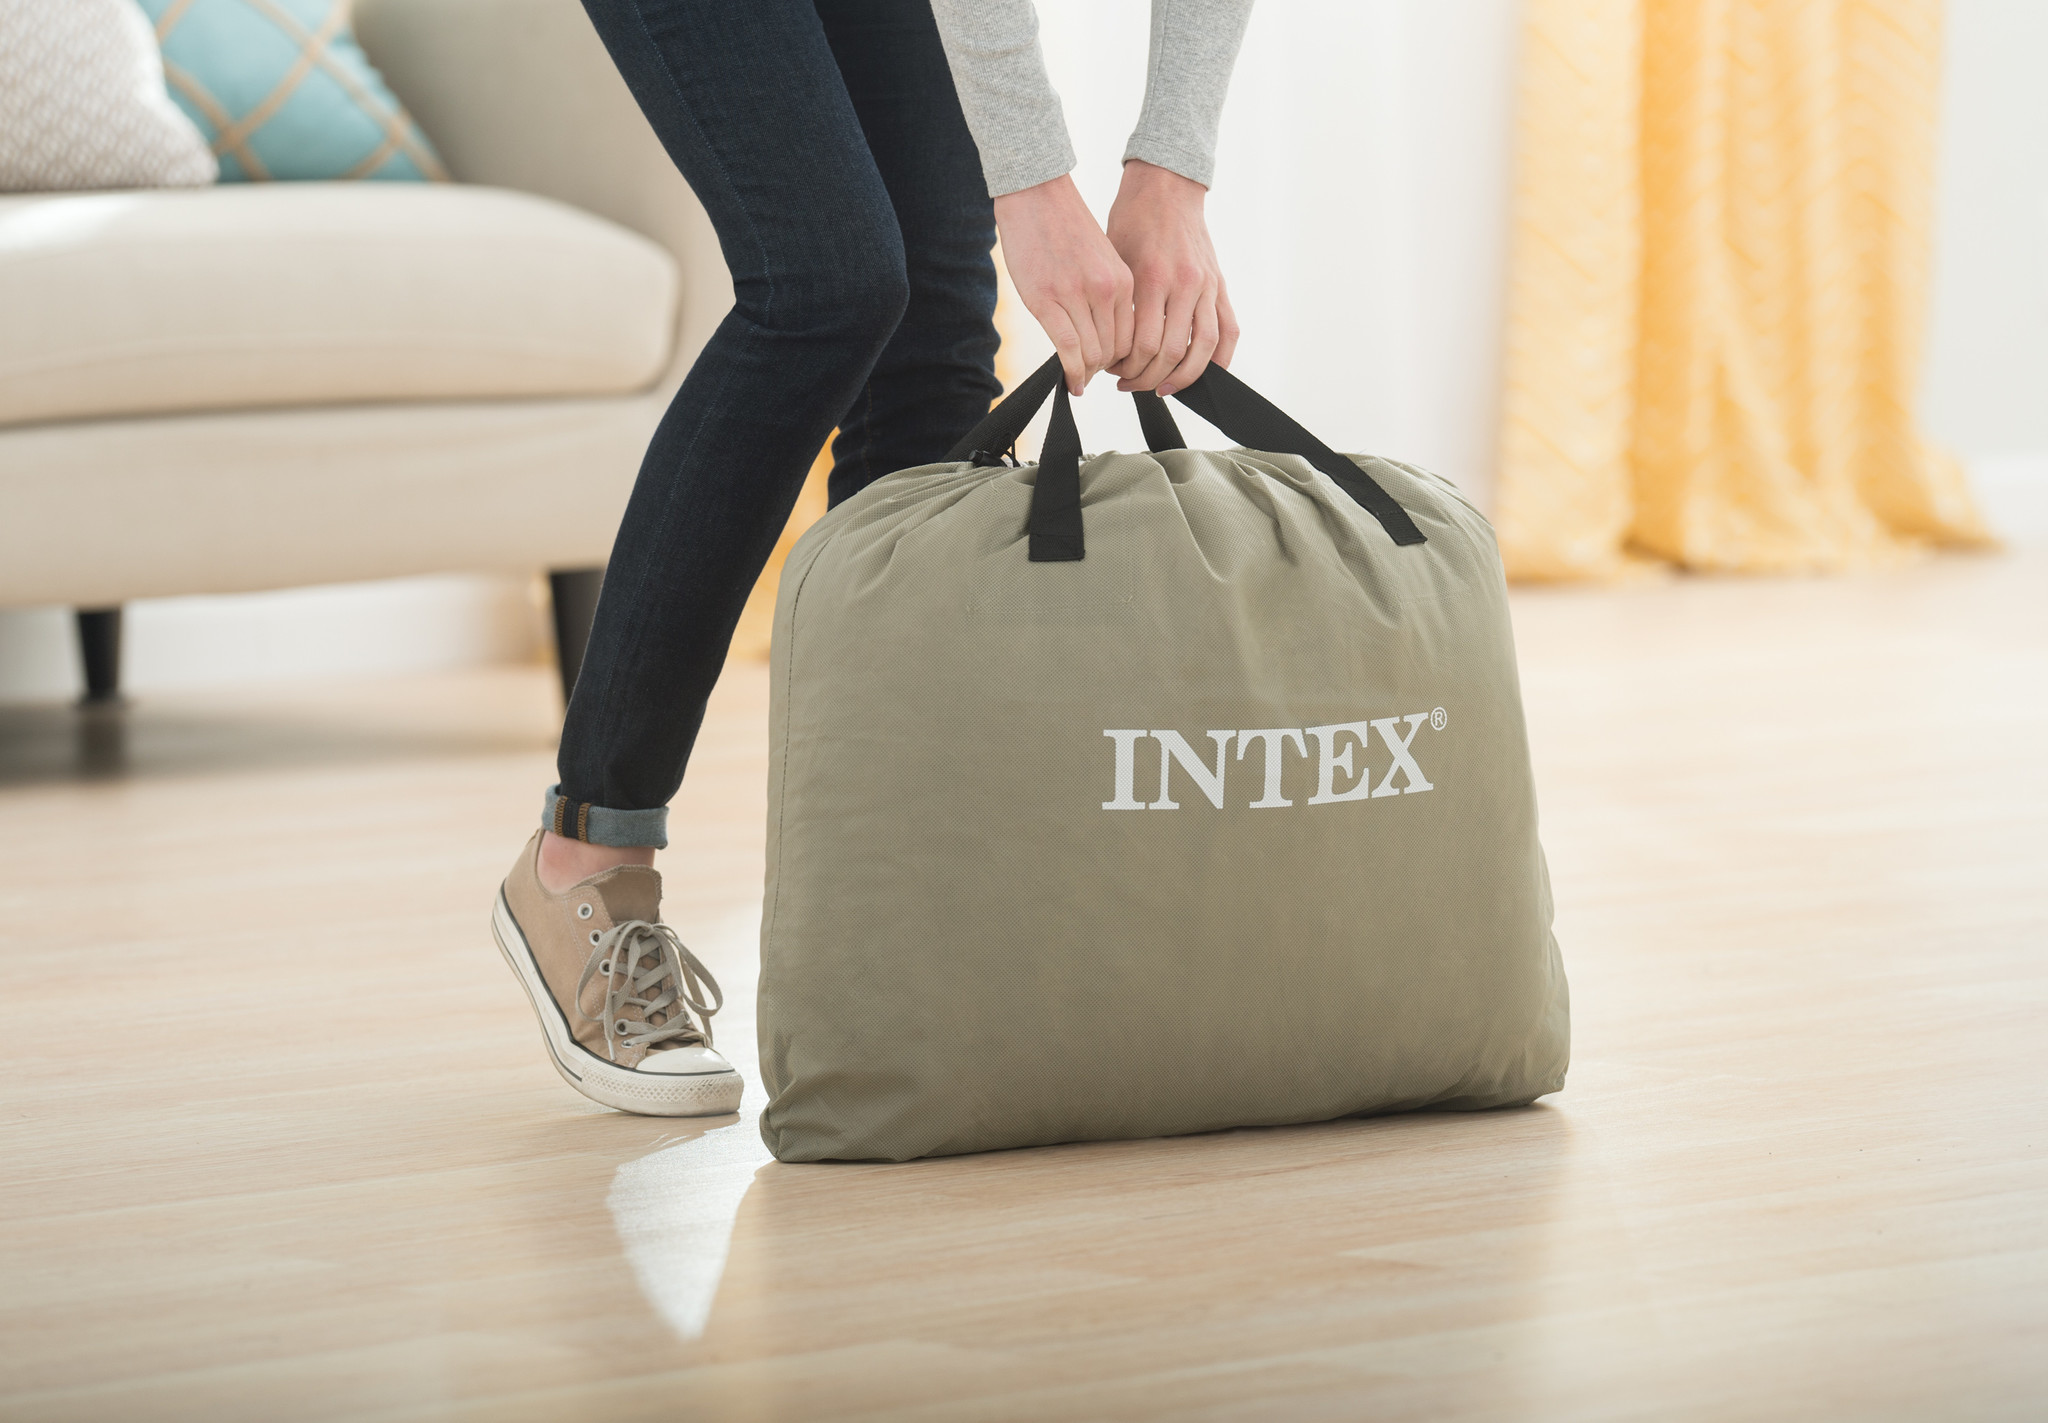 Intex Pillow Raised 191x99x42 cm | persoons luchtbed | Luchtbedshop.com